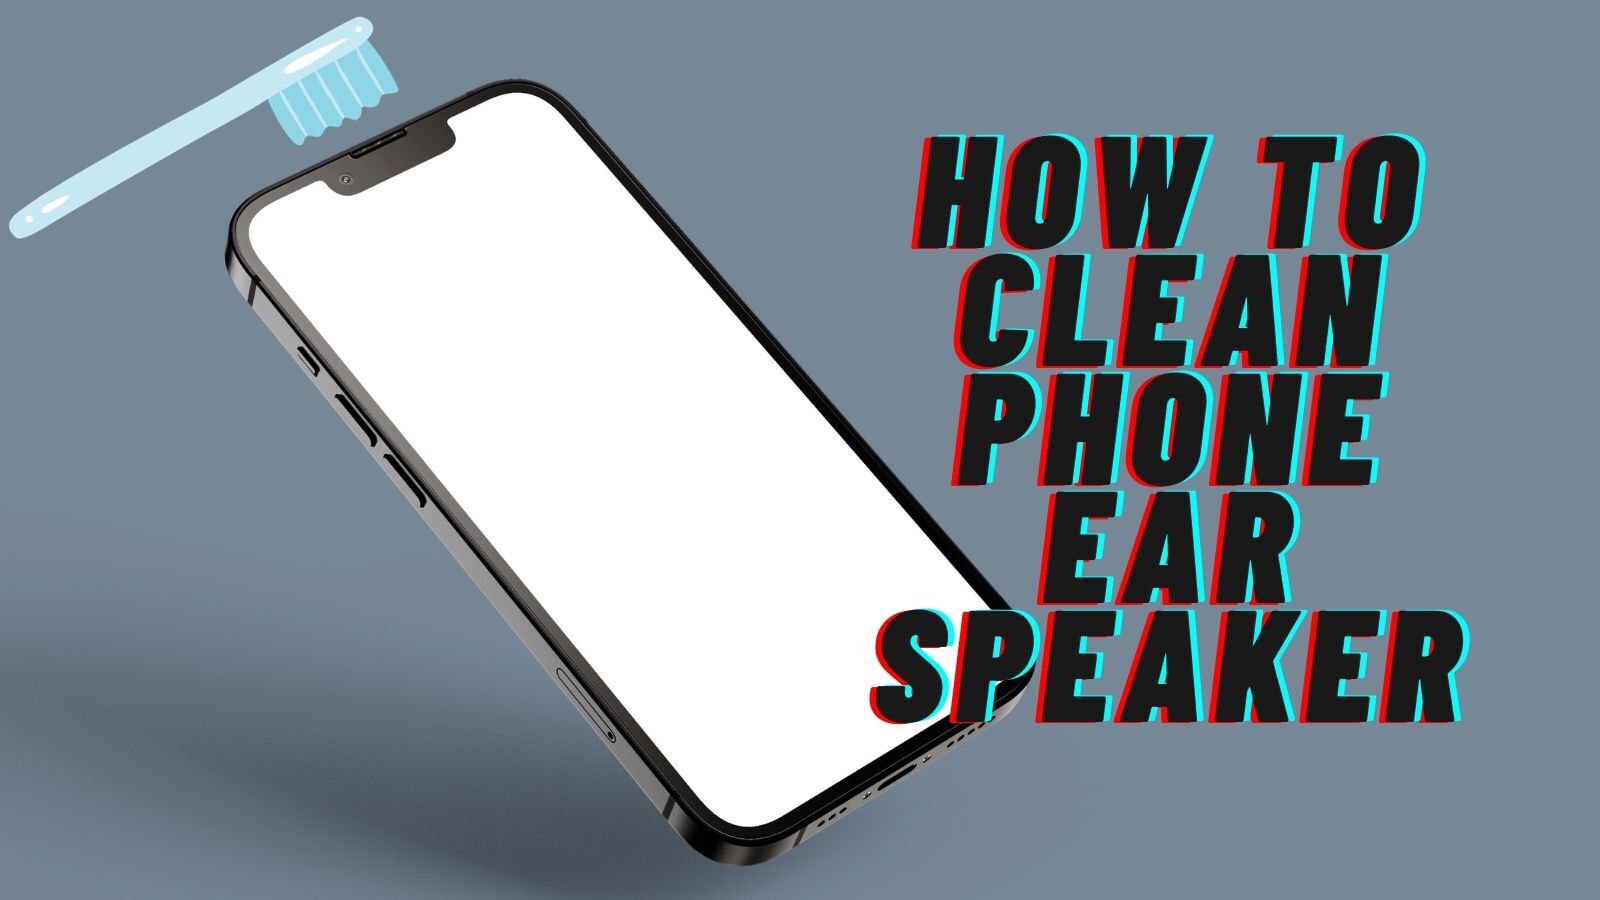 How to Clean Phone Speaker? (Try These 3 Easy Ways)